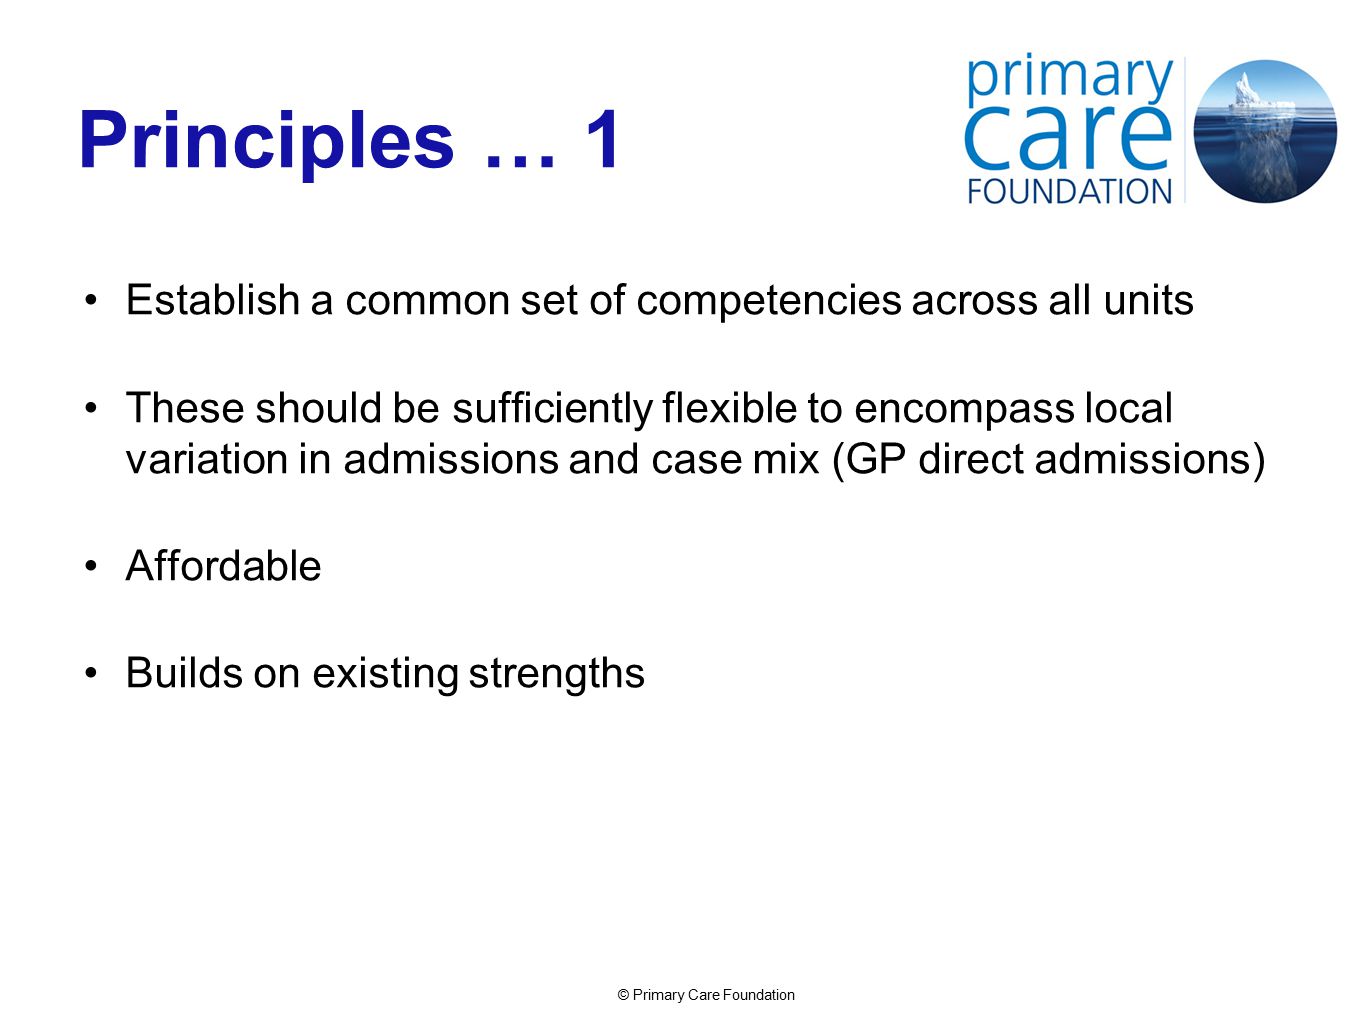 © Primary Care Foundation Principles … 1 Establish a common set of competencies across all units These should be sufficiently flexible to encompass local variation in admissions and case mix (GP direct admissions) Affordable Builds on existing strengths